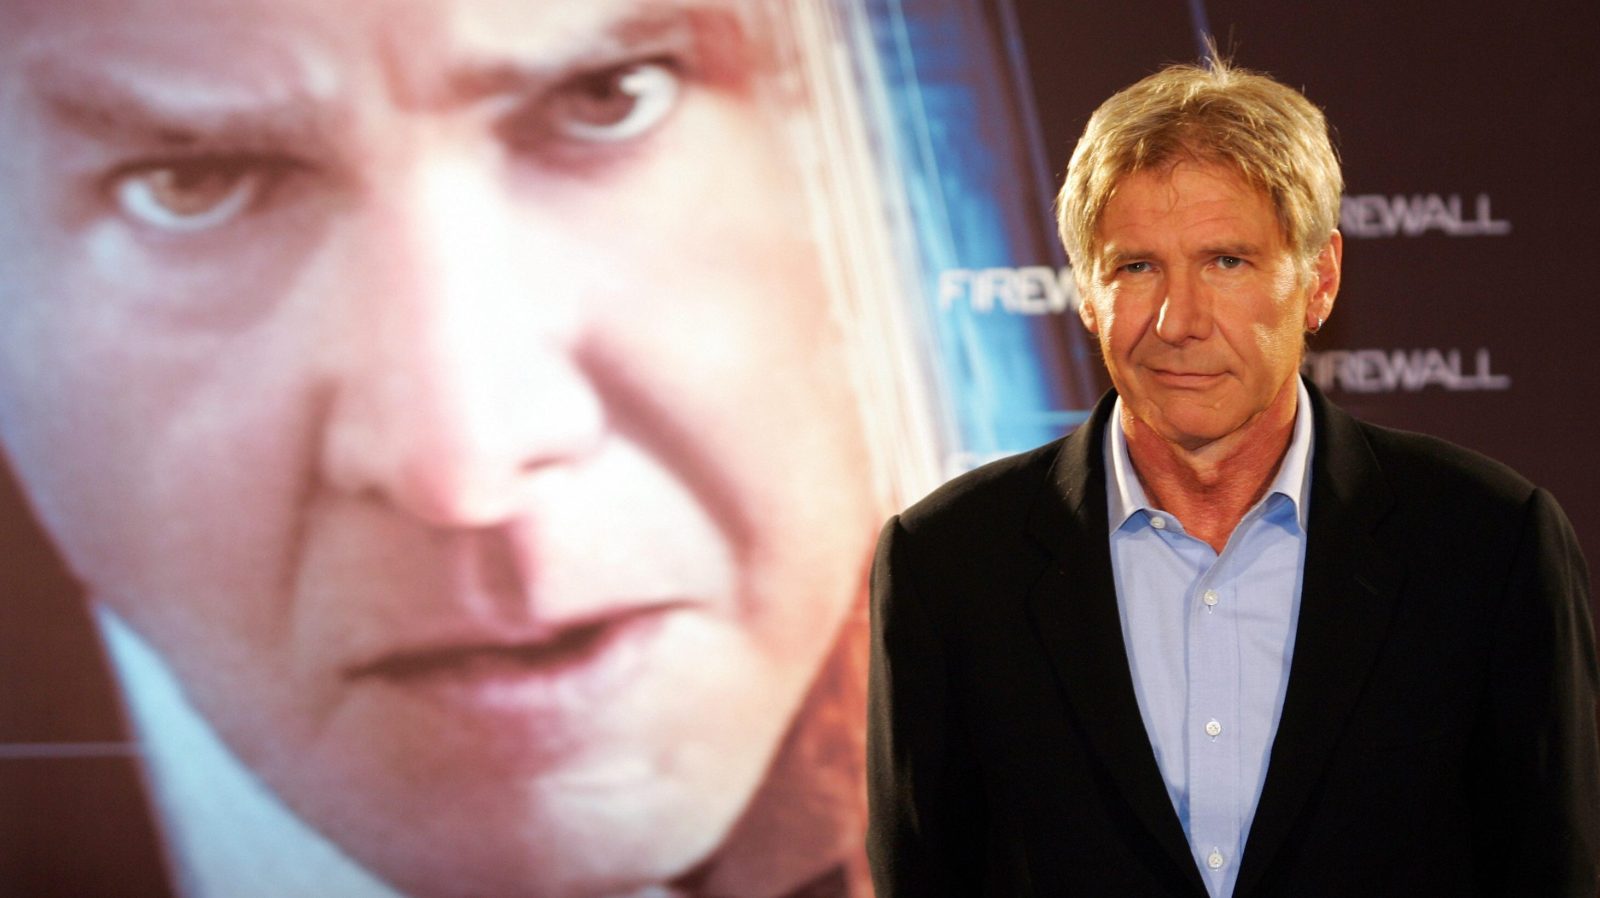 US actor Harrison Ford poses during a photoshoot for the Firewall film